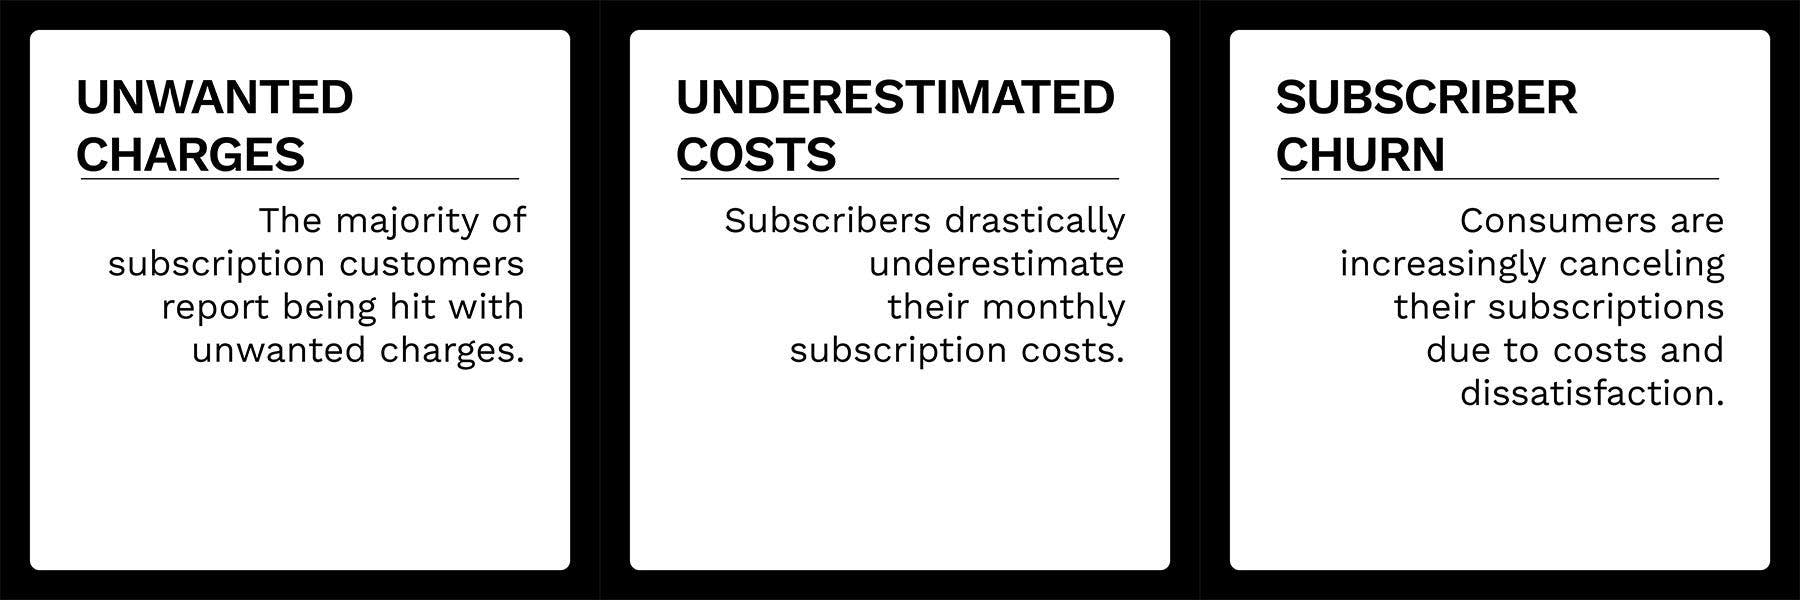 Unwanted charges, underestimated costs, and subscriber churn